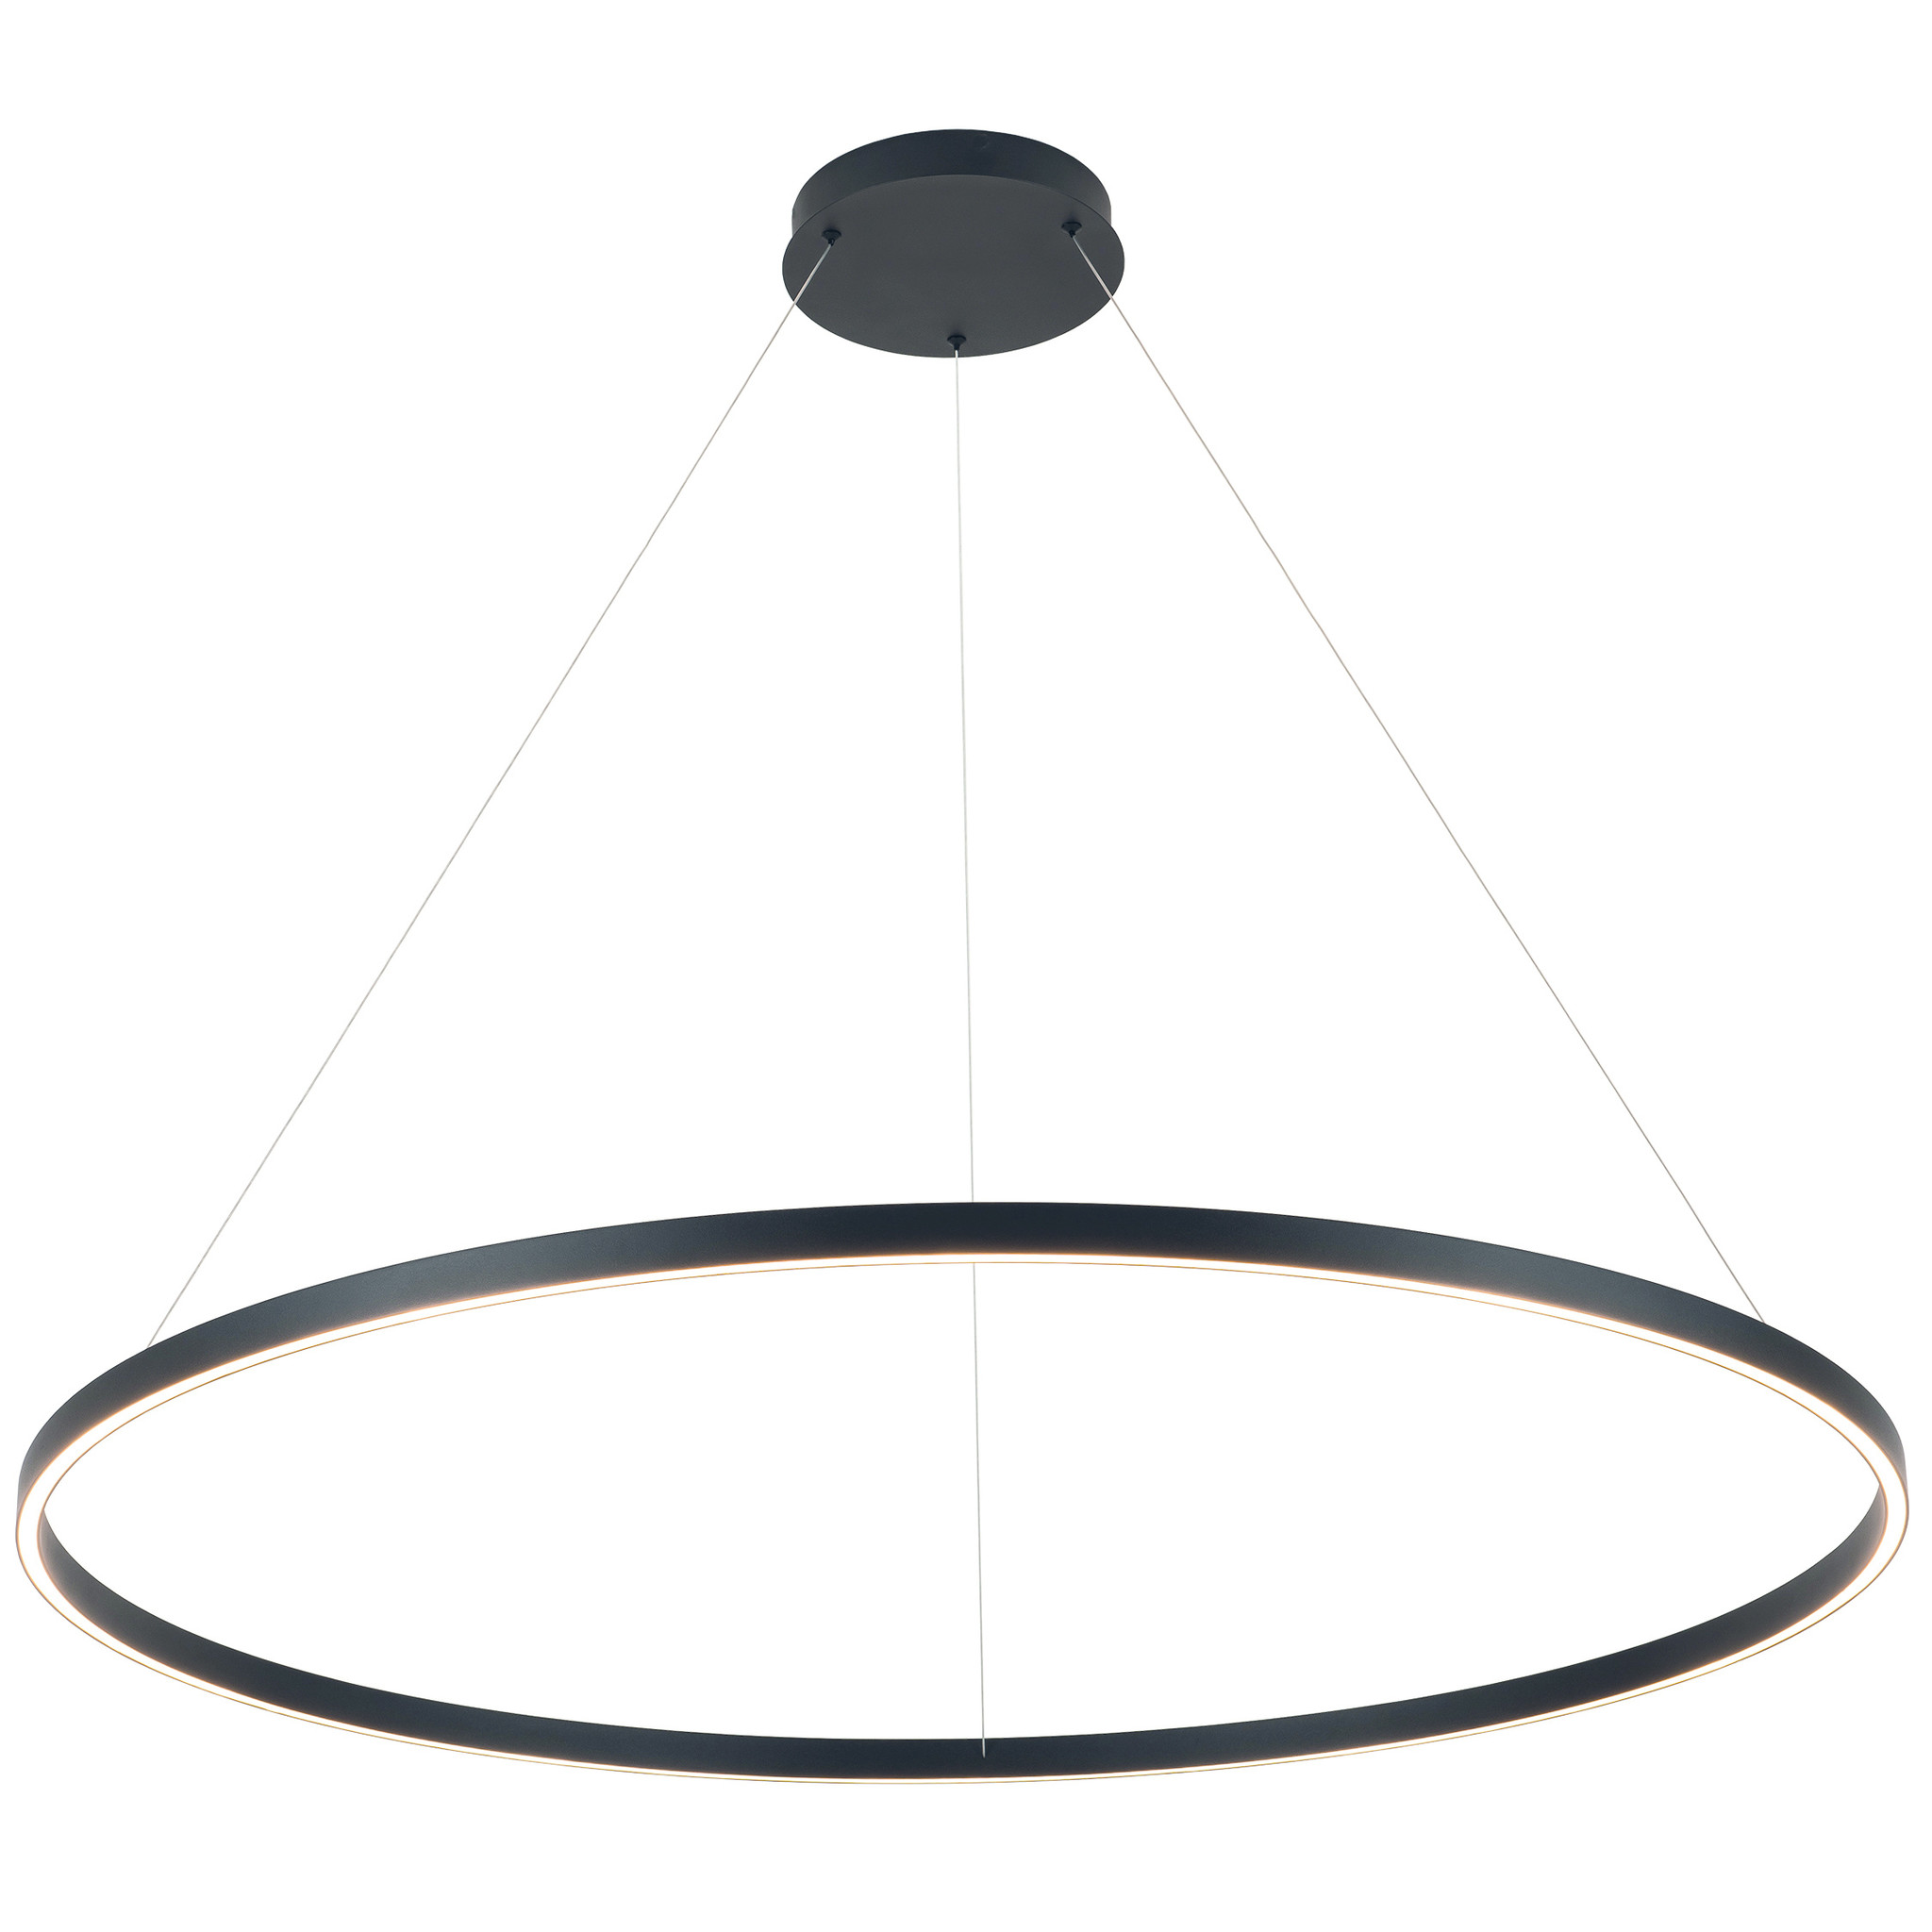 Hanglamp design rond LED of 105W 1200mm Ø licht up en down | My Planet